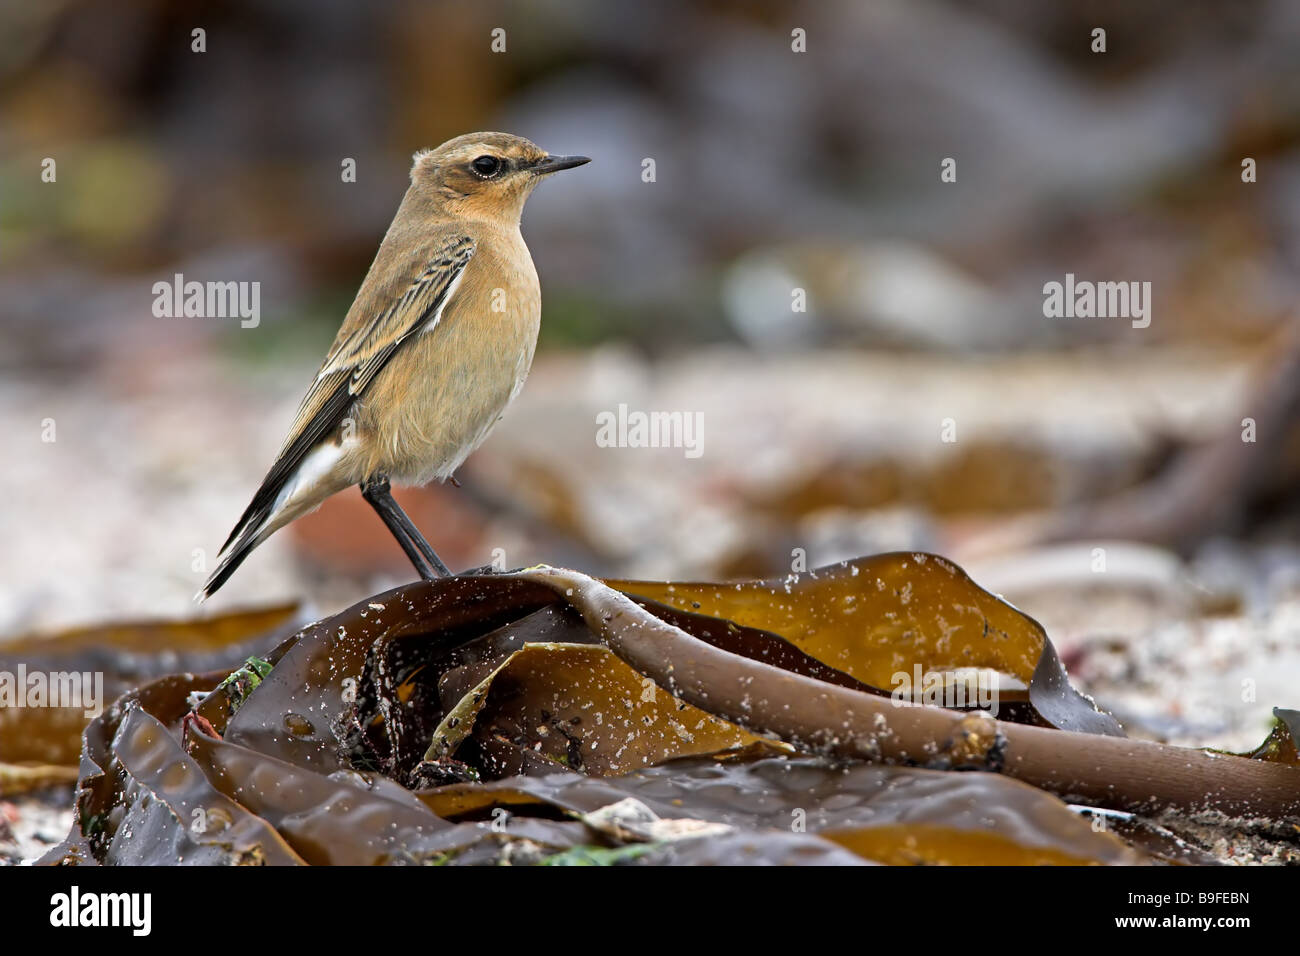 Close-up of Wheatear on leaf in field Stock Photo